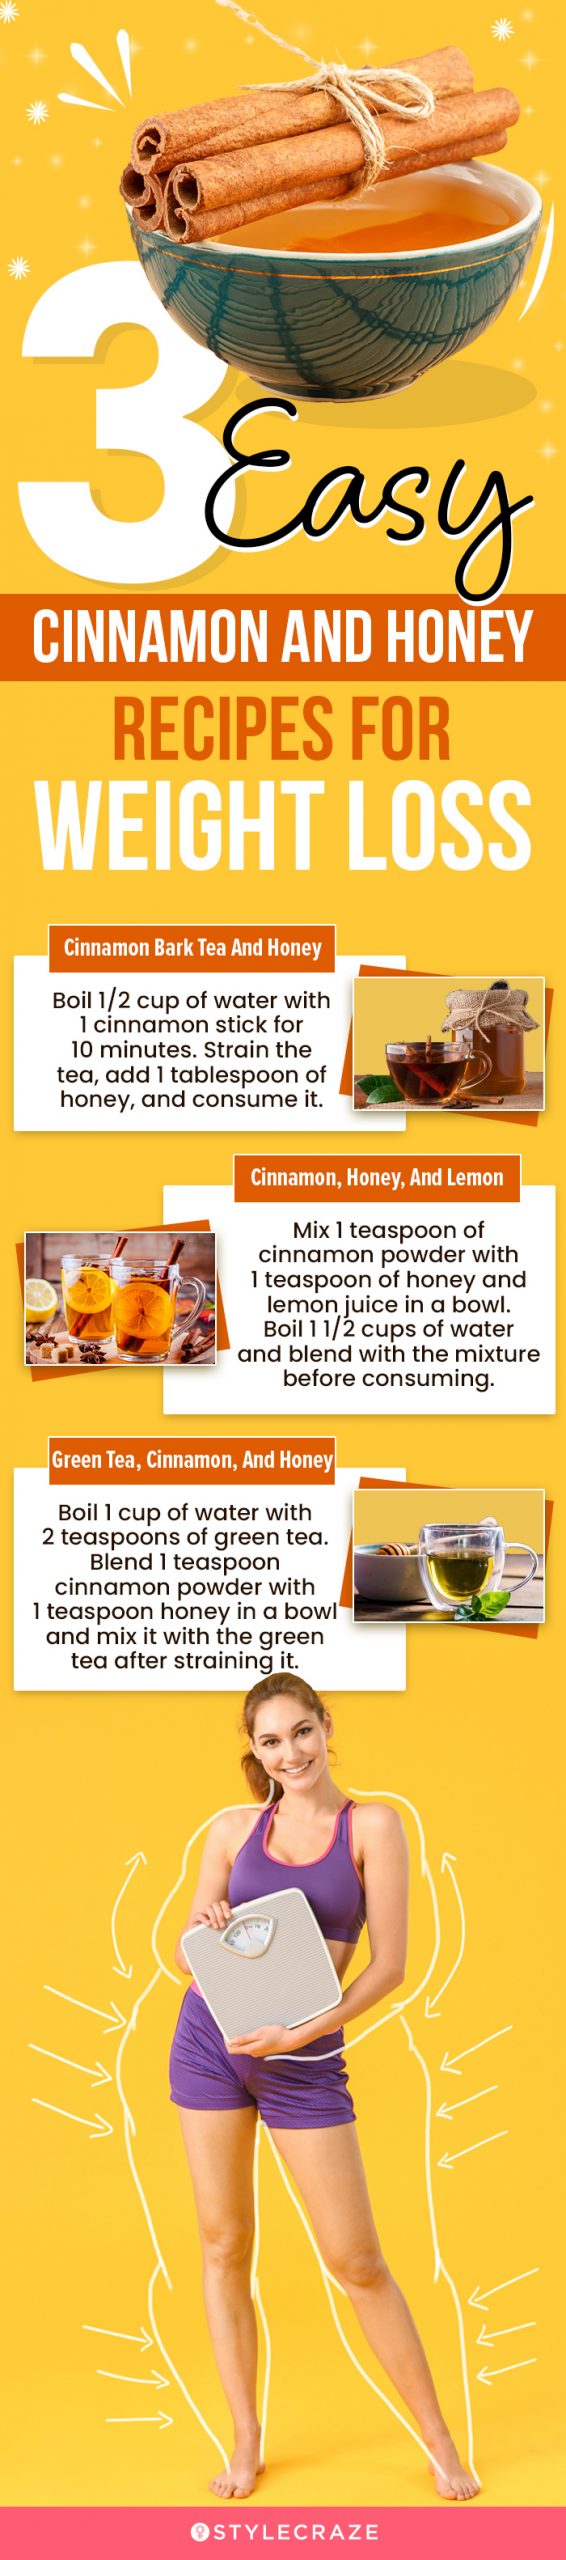 3 easy cinnamon and honey recipes for weight loss (infographic)